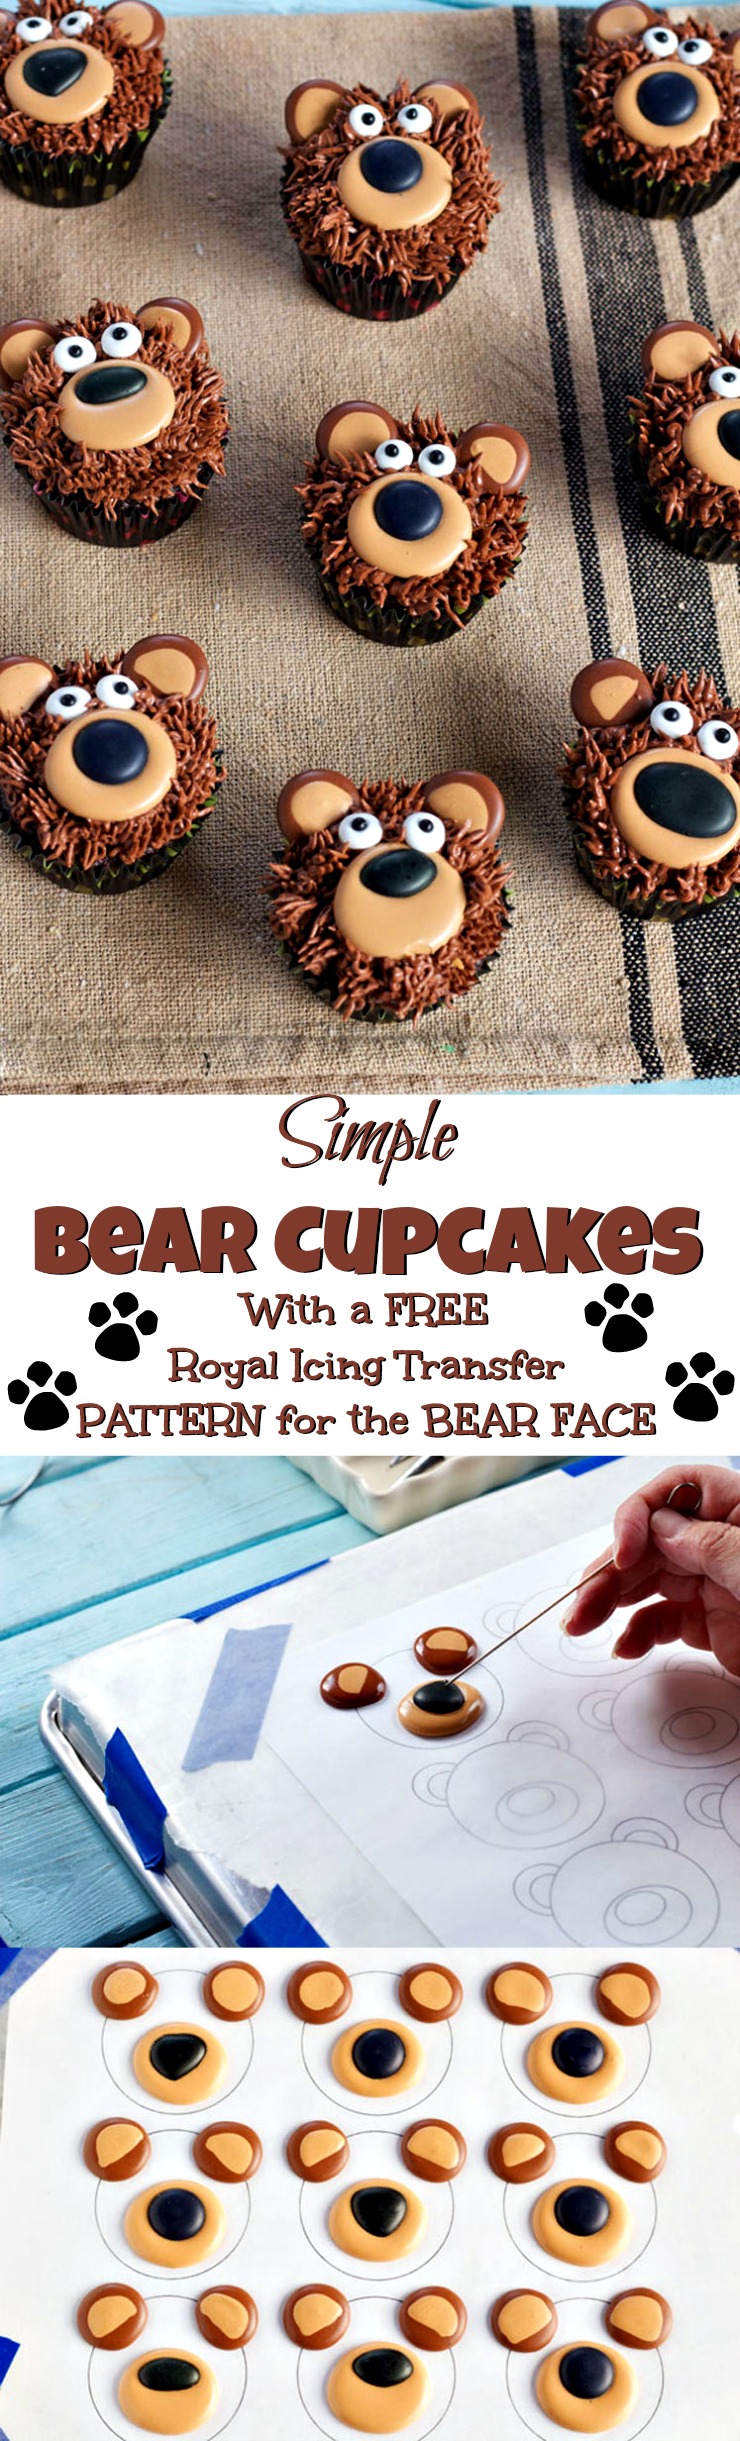 Bear-Cupcakes-with-Royal-Icing-Transfers-via-www.thebearfootbaker